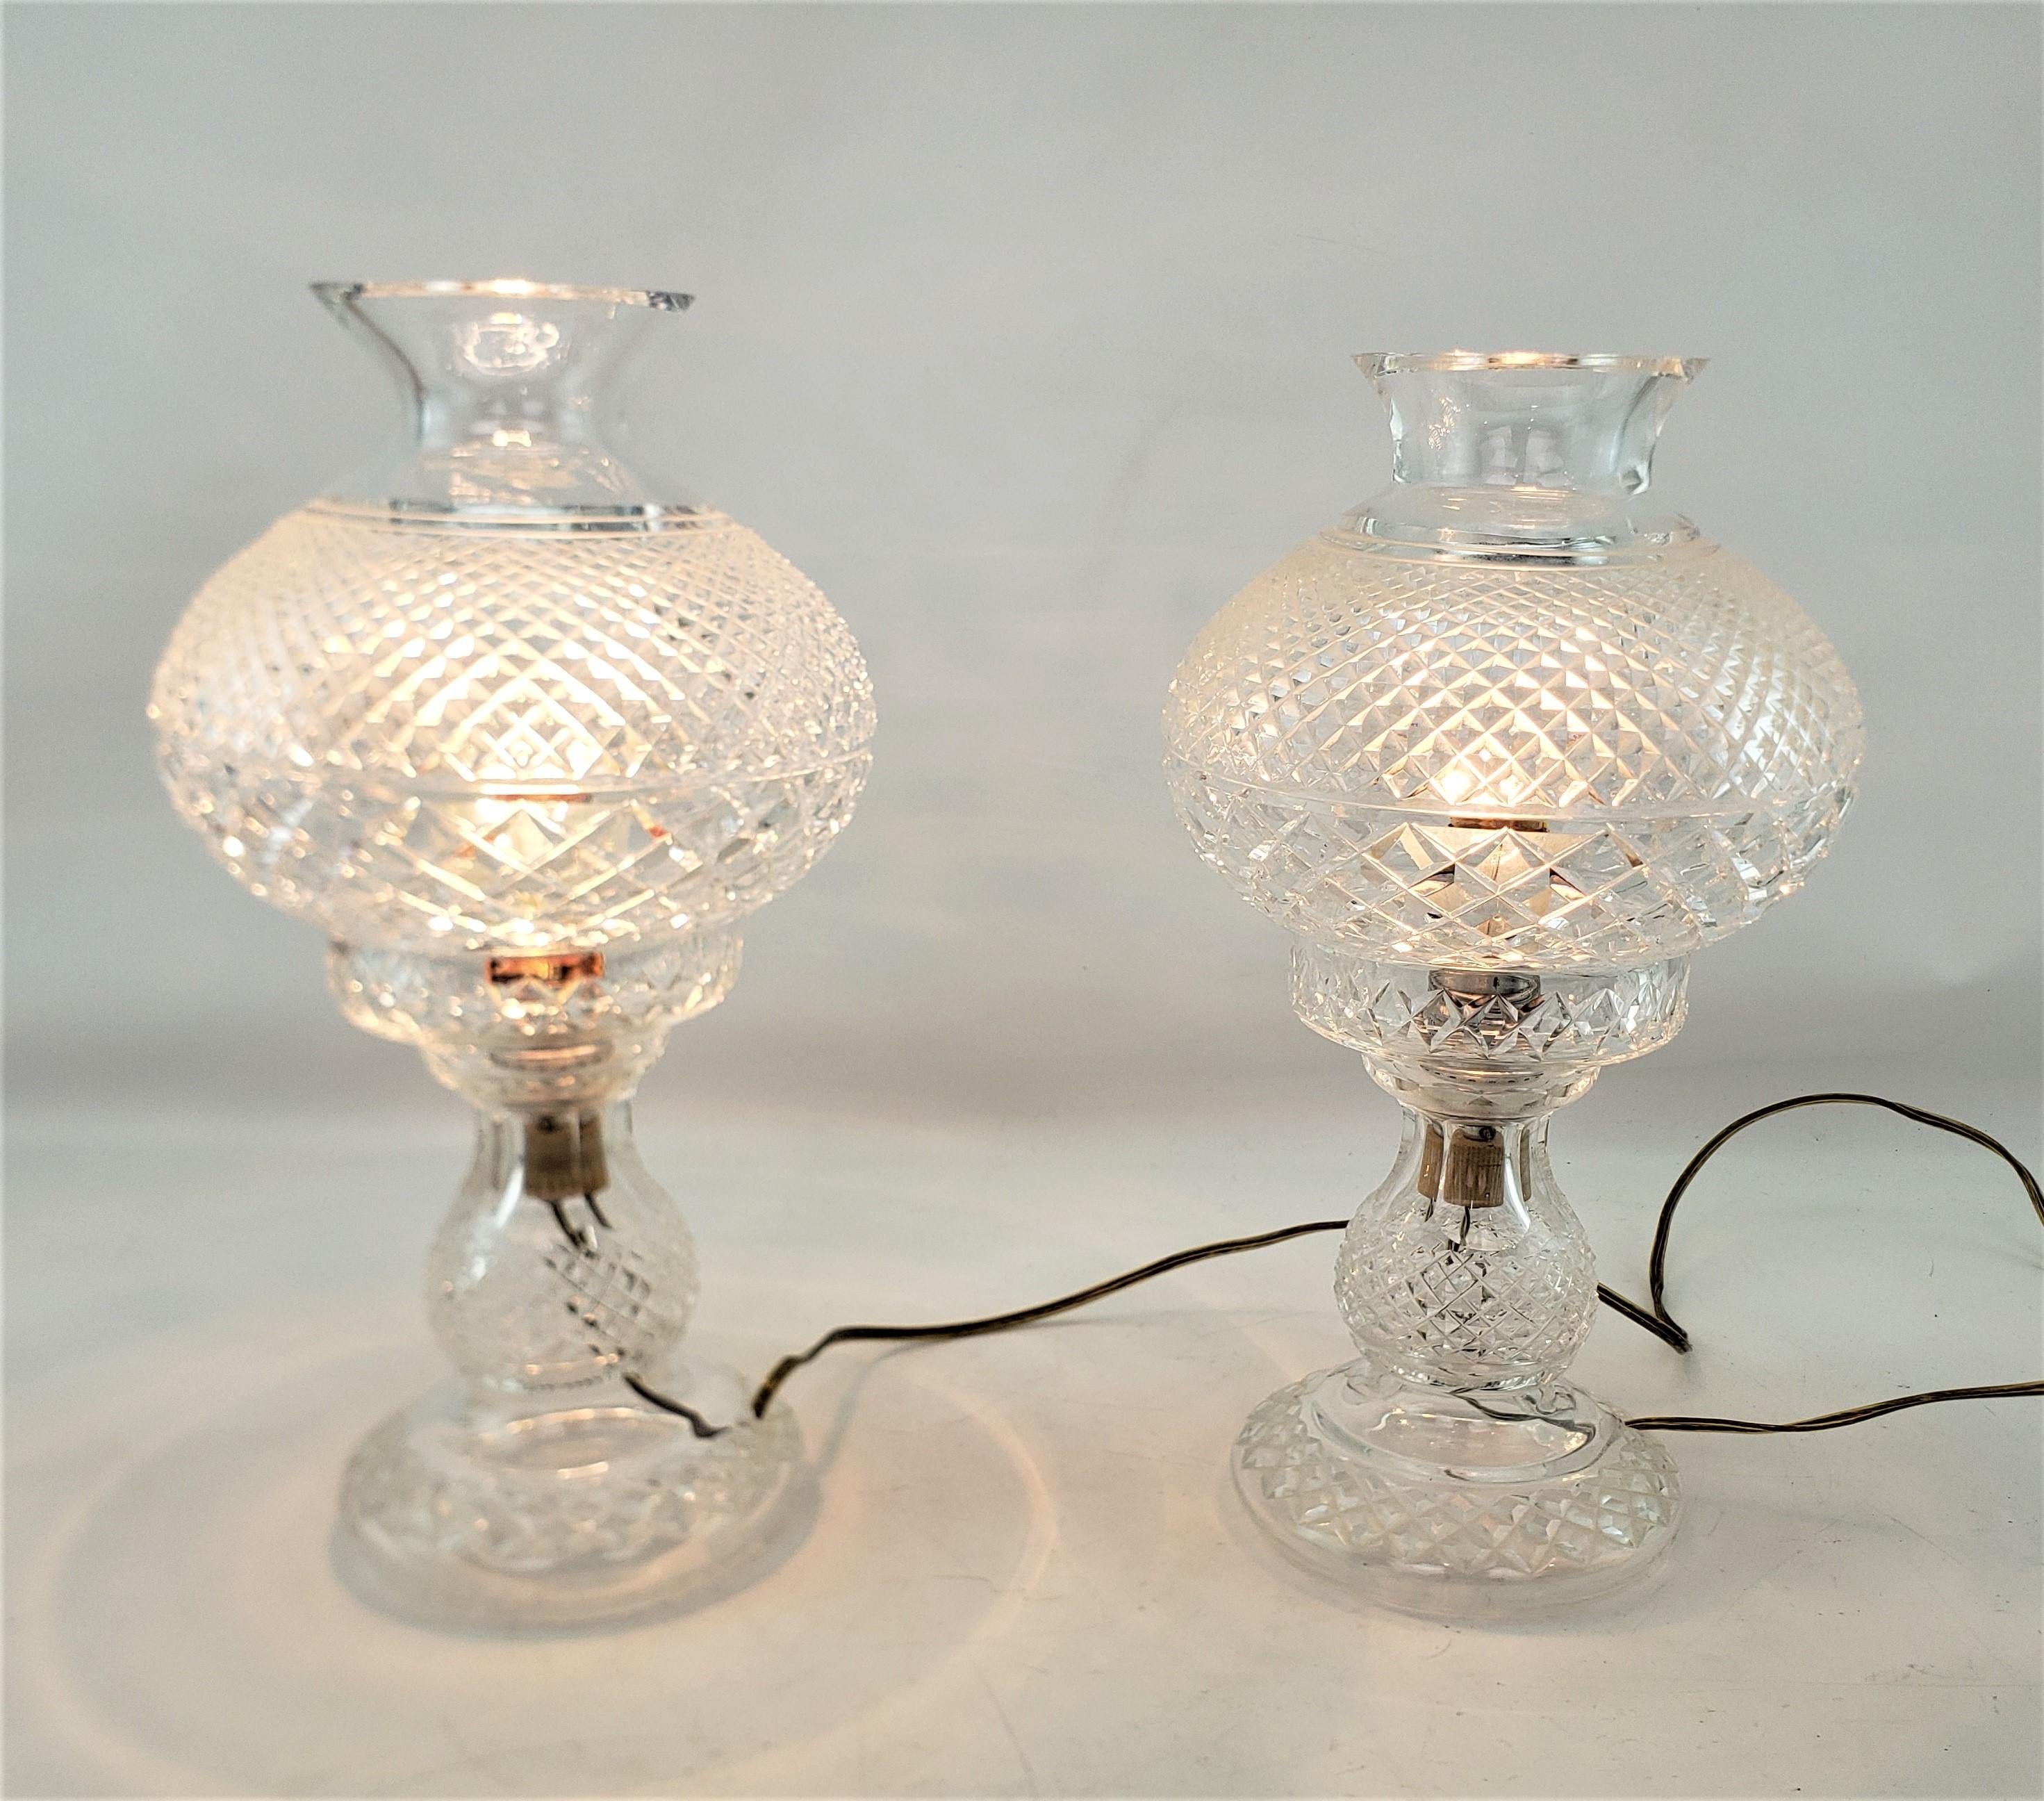 waterford crystal lamps